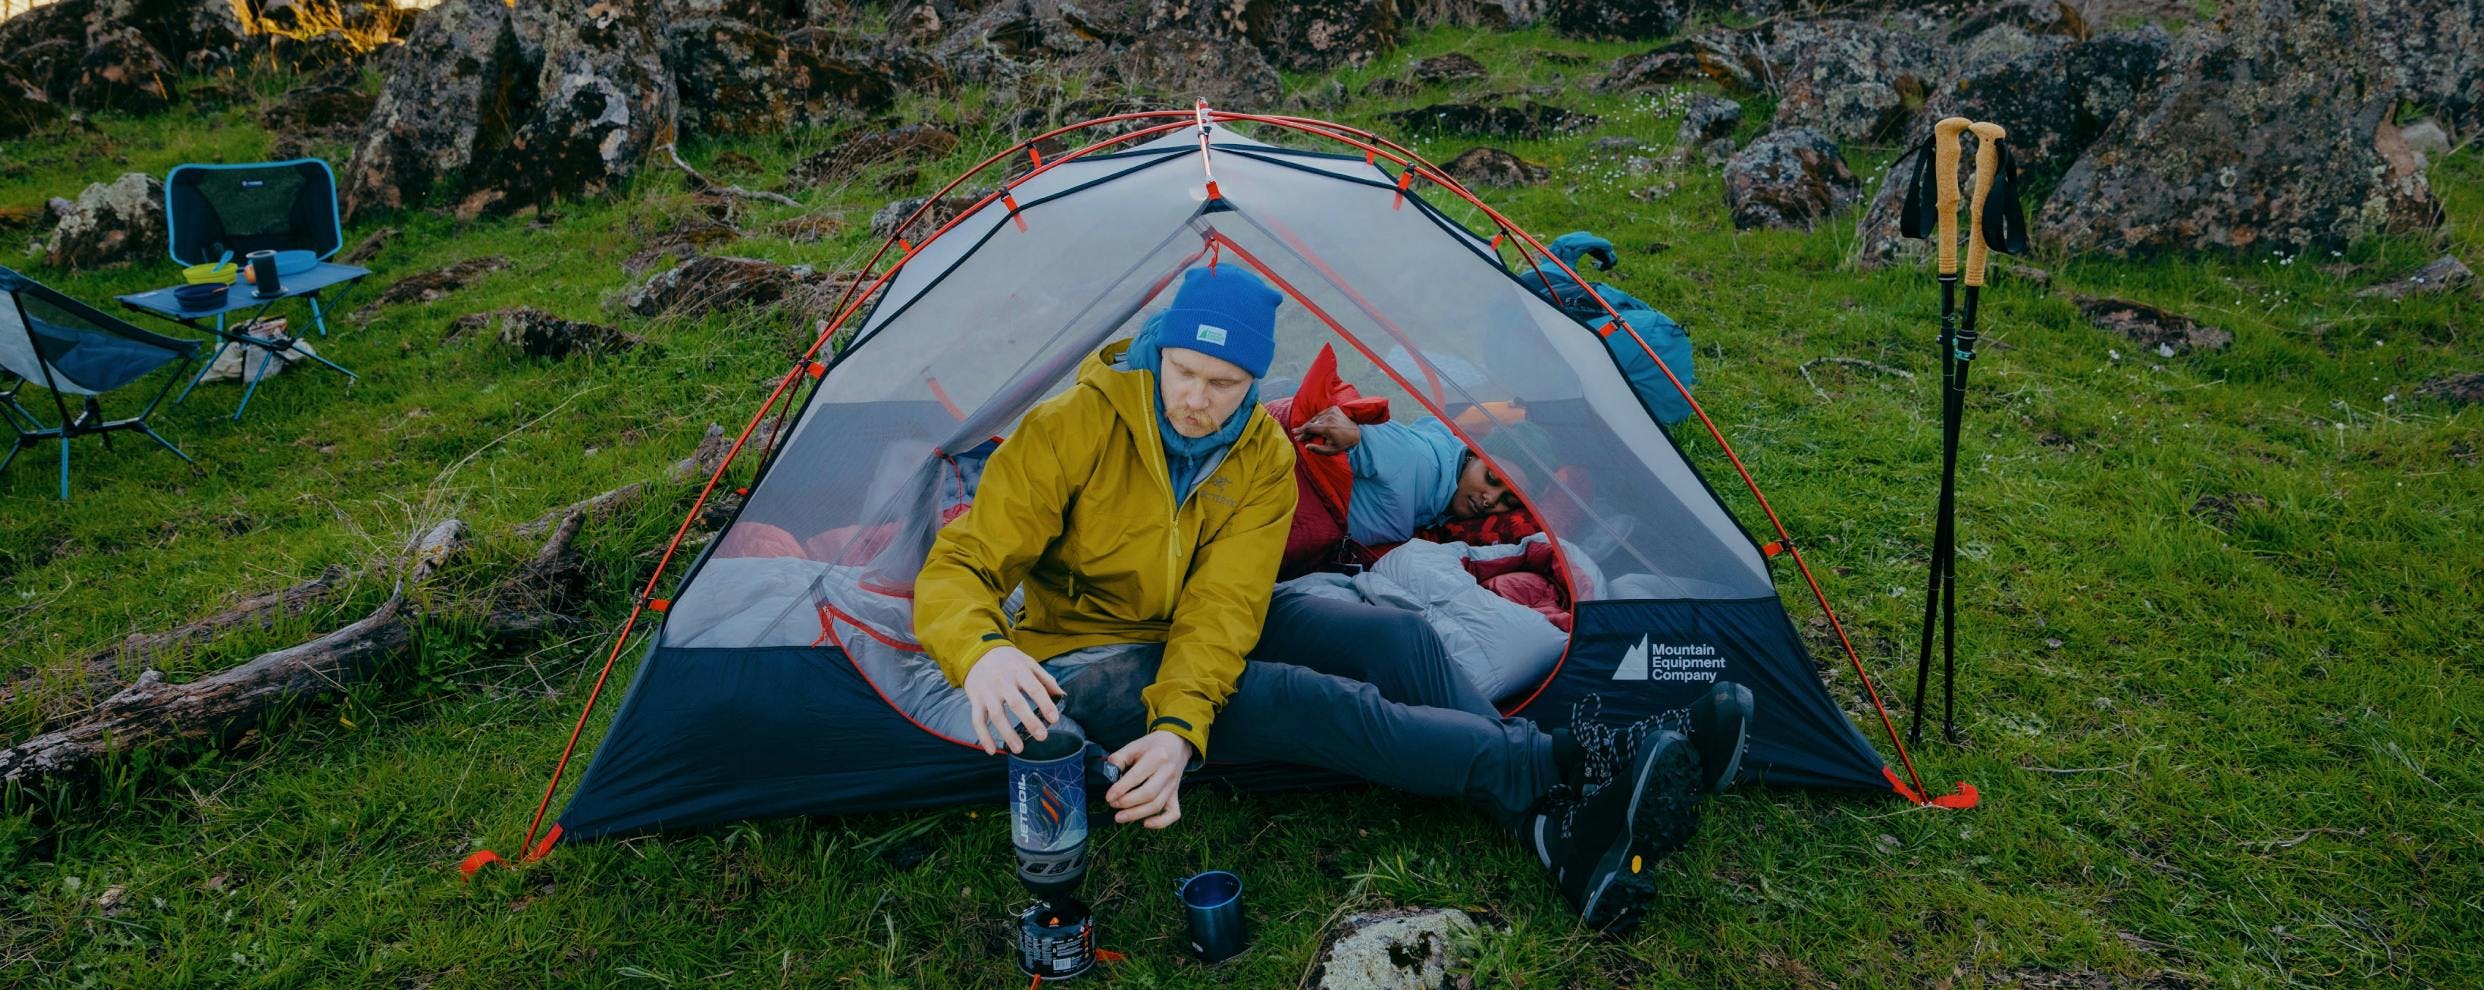 Find your home away from home for backpacking trips or family sleepovers in the forest.